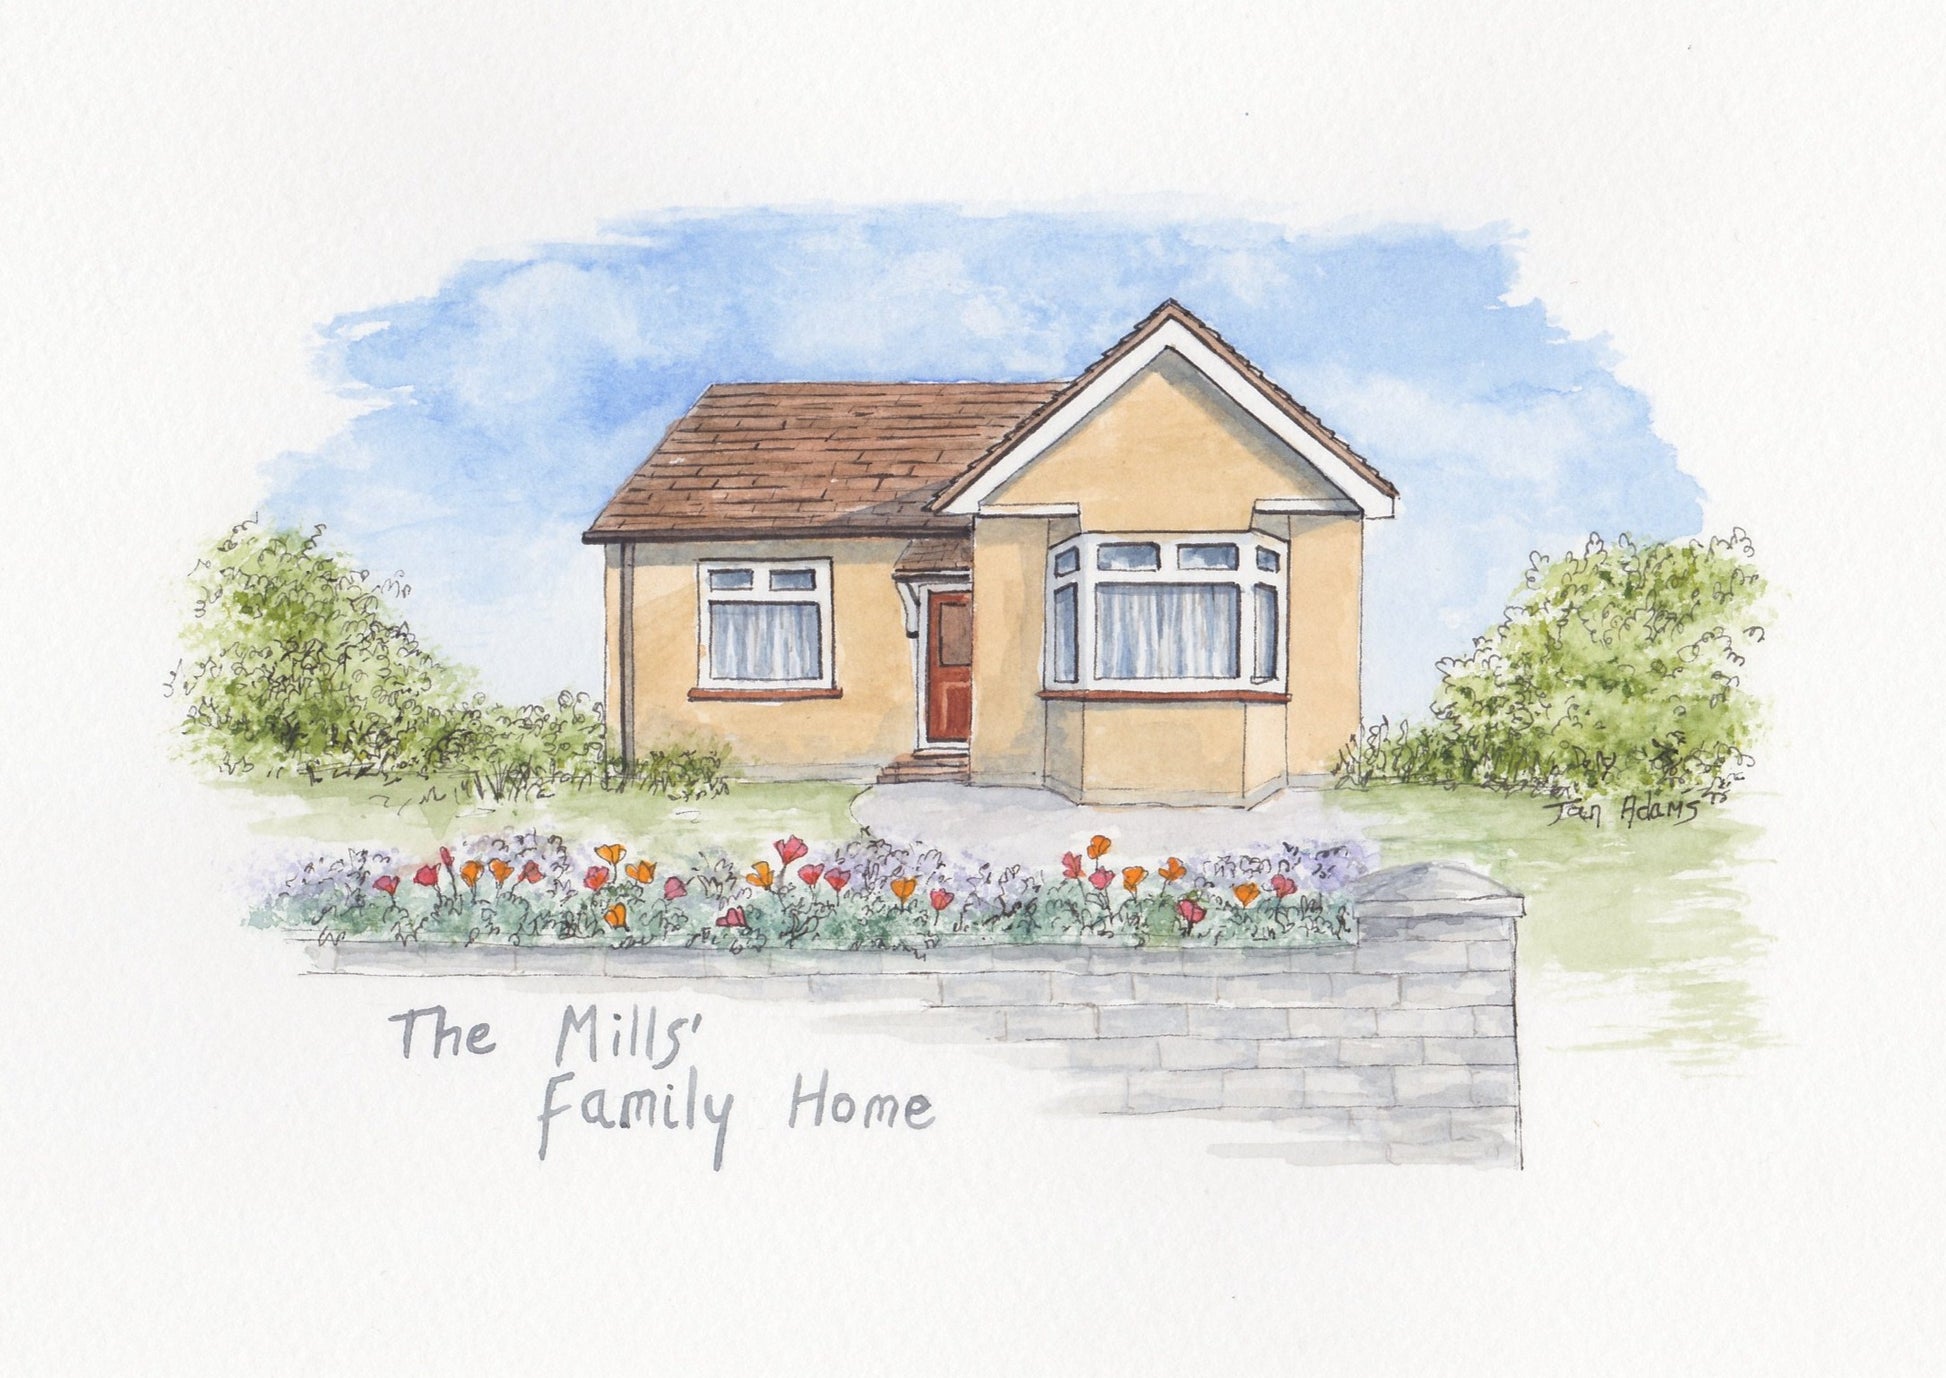 Colourful illustration of small detached house from photo